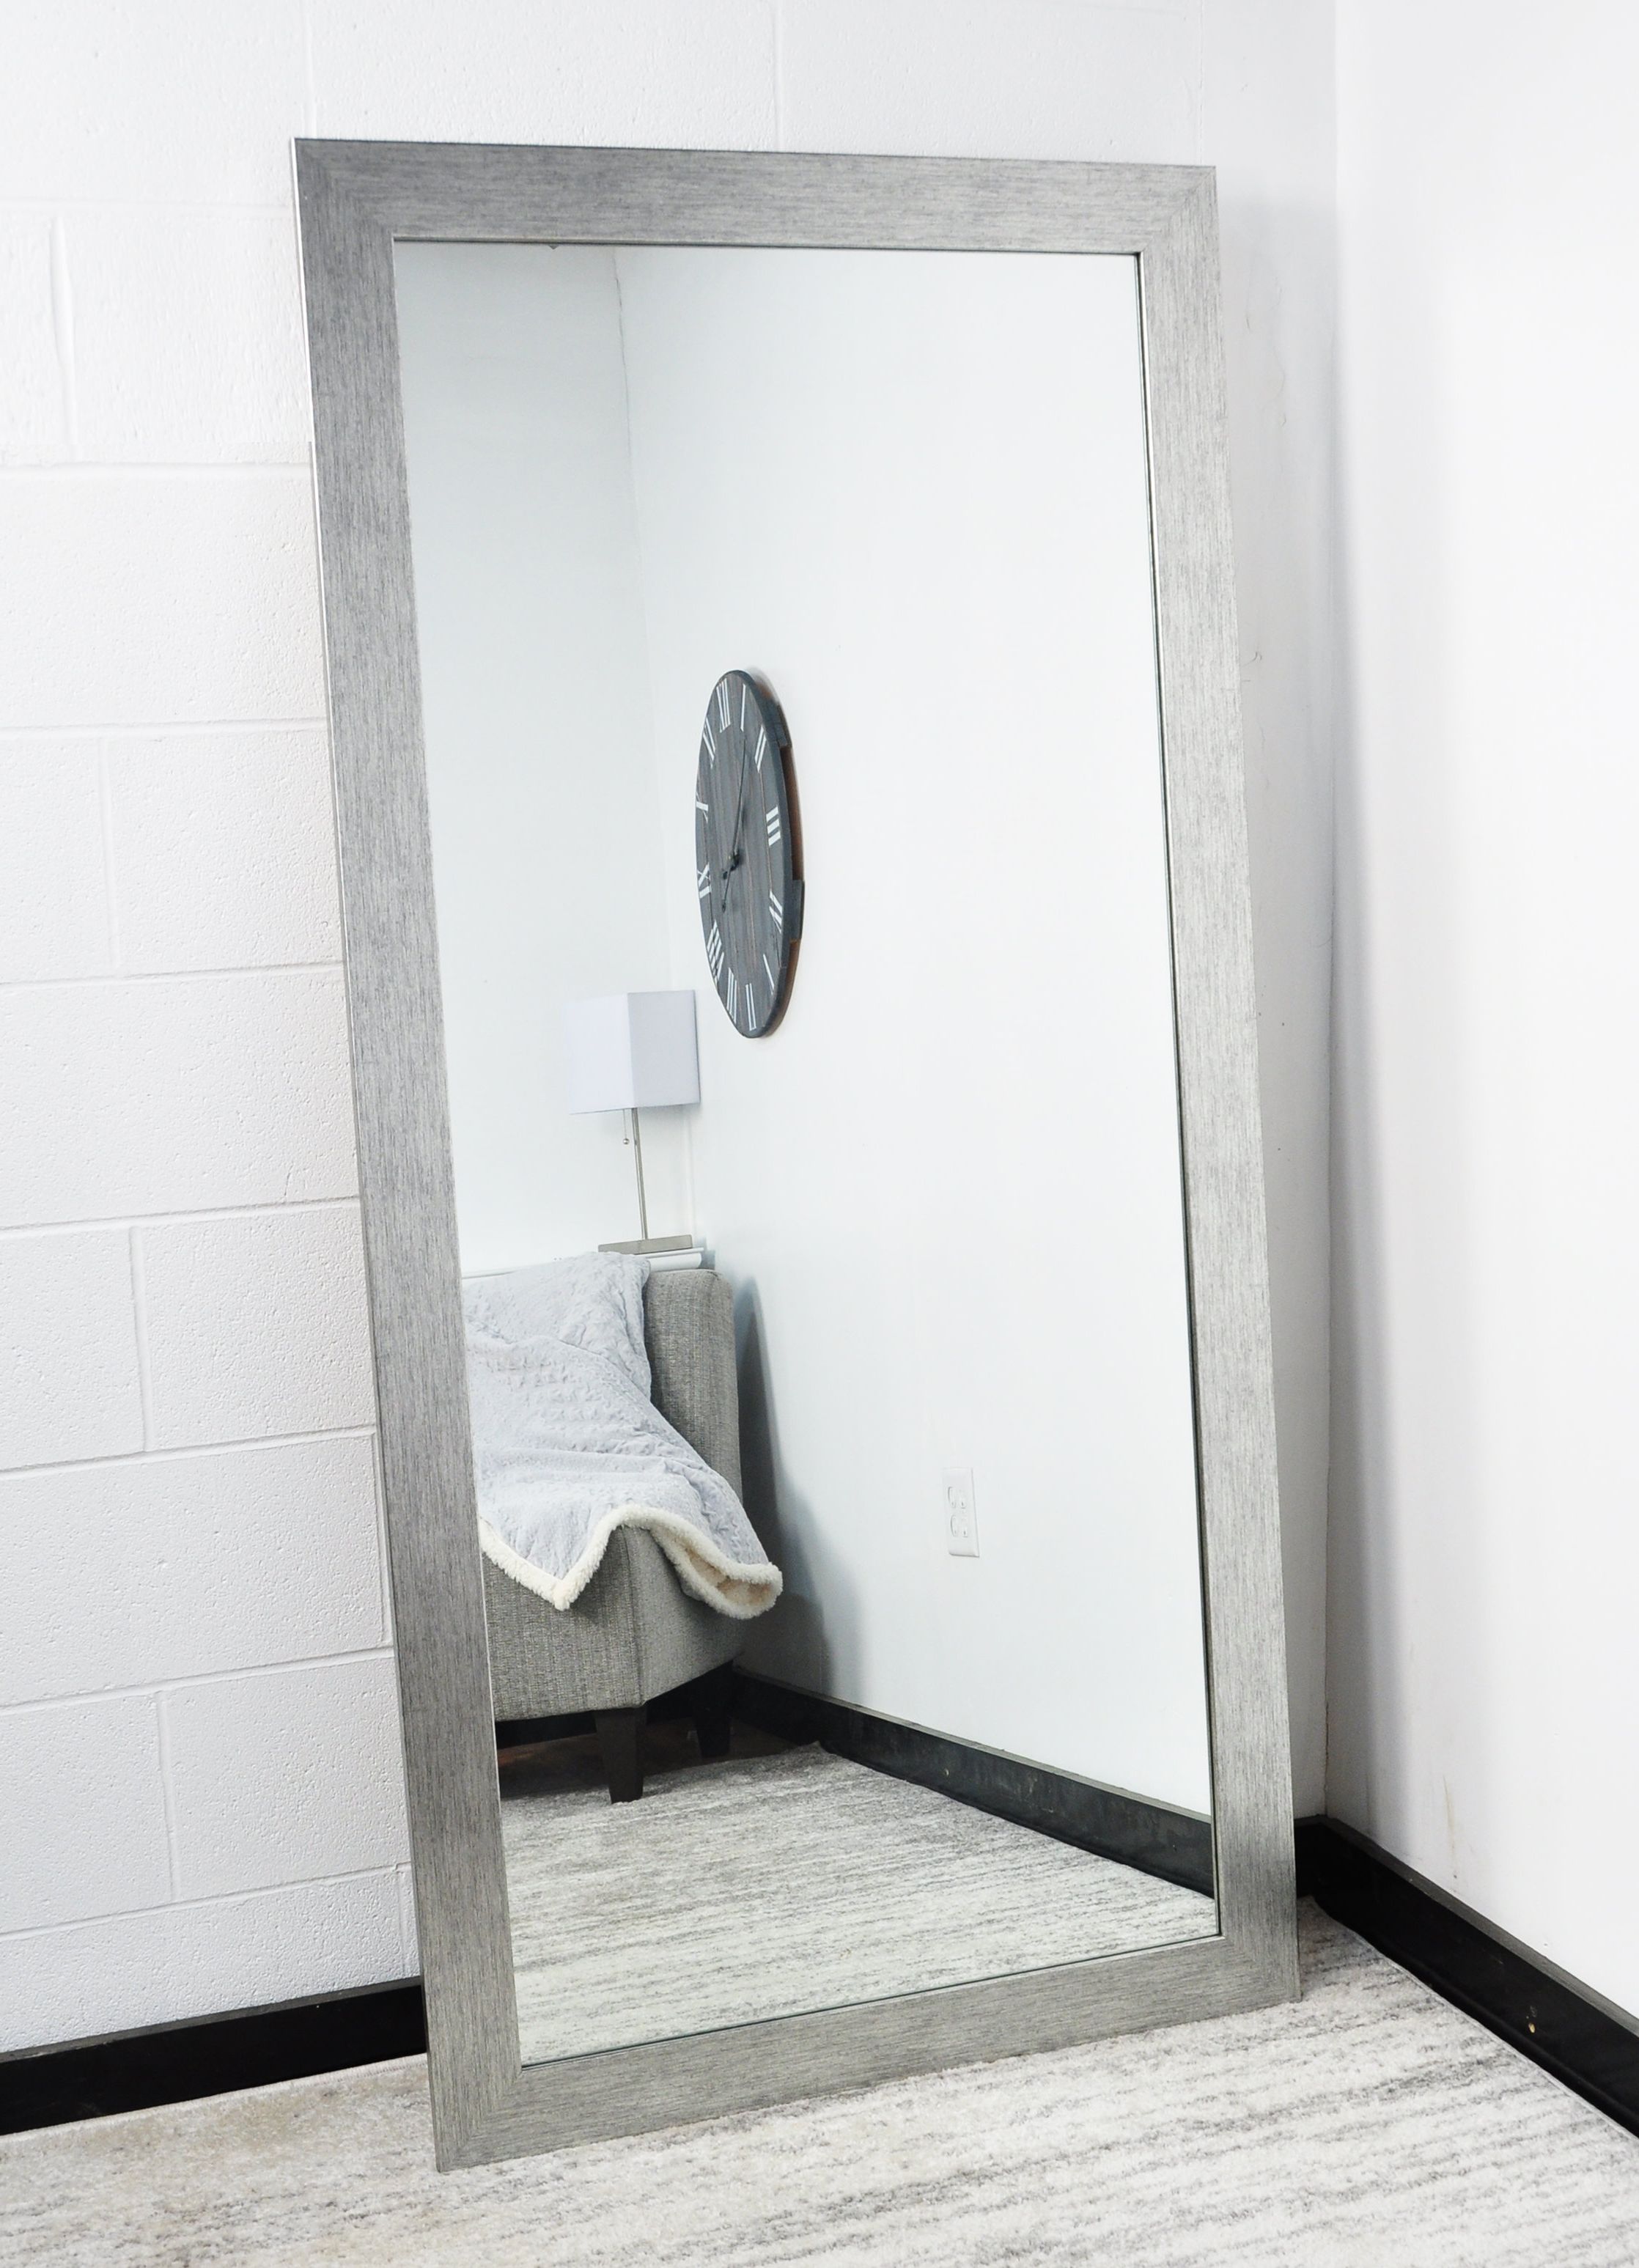 Current Giannone Grain Full Modern & Contemporary Length Mirror Regarding Dalessio Wide Tall Full Length Mirrors (View 11 of 20)